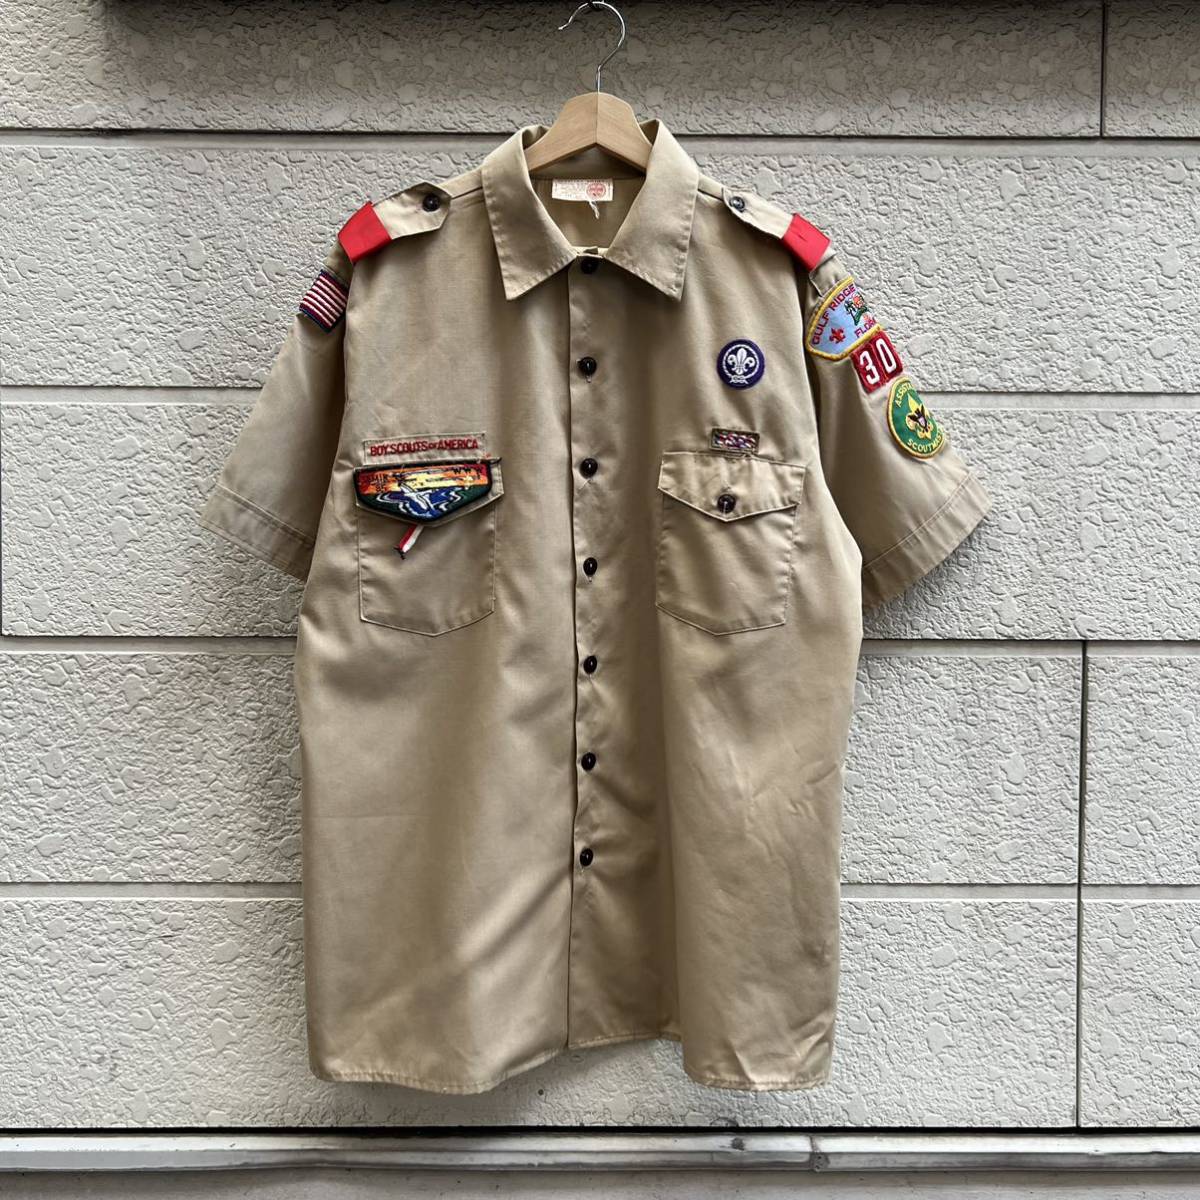 PayPayフリマ｜80s USA製 半袖シャツ BSA BOY SCOUT ボーイスカウト ワッペン OFFICIAL SHIRT ワークシャツ  アメリカ製 古着 vintage ヴィンテージ L